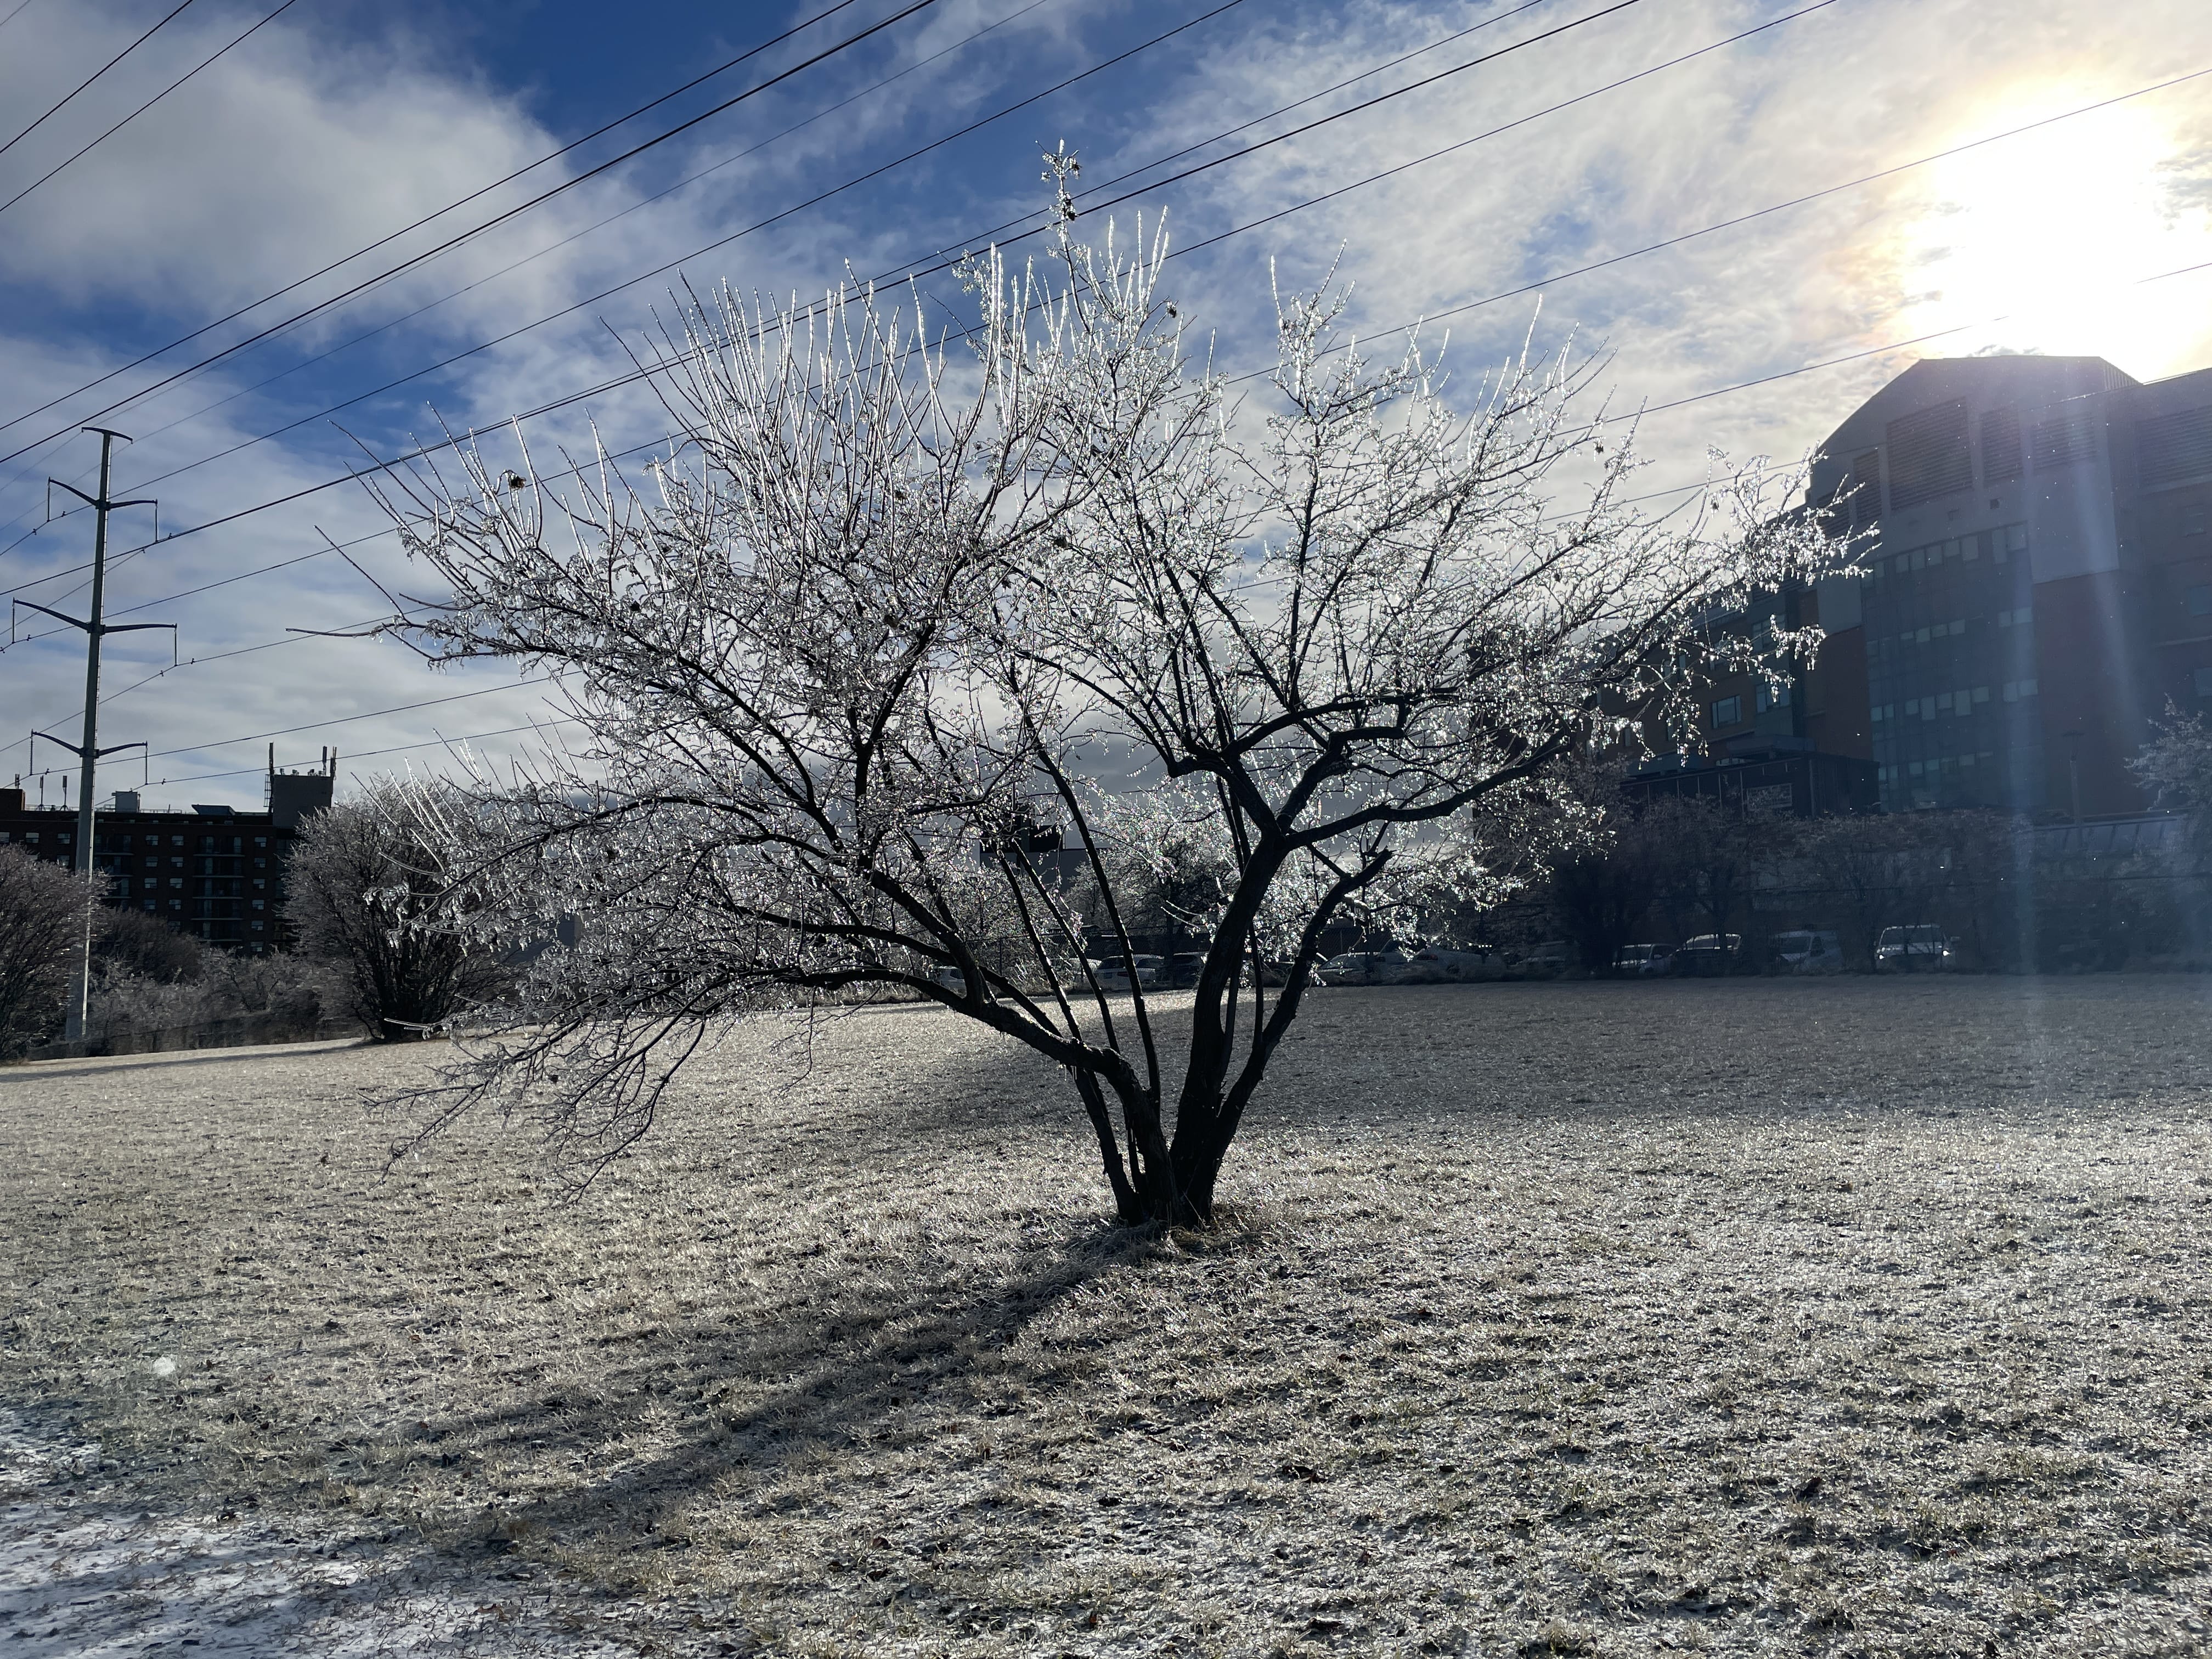 Morning photo of the sun rising over an ice-covered tree in Thomson Memorial park. The sun is slightly occluded by clouds, and there is a visible lens flare. The sky visible between the clouds is a deep cerulean blue. Every branch is covered with delicate, transparent beads of ice. In the background are mid-rise residential buildings and a power line.